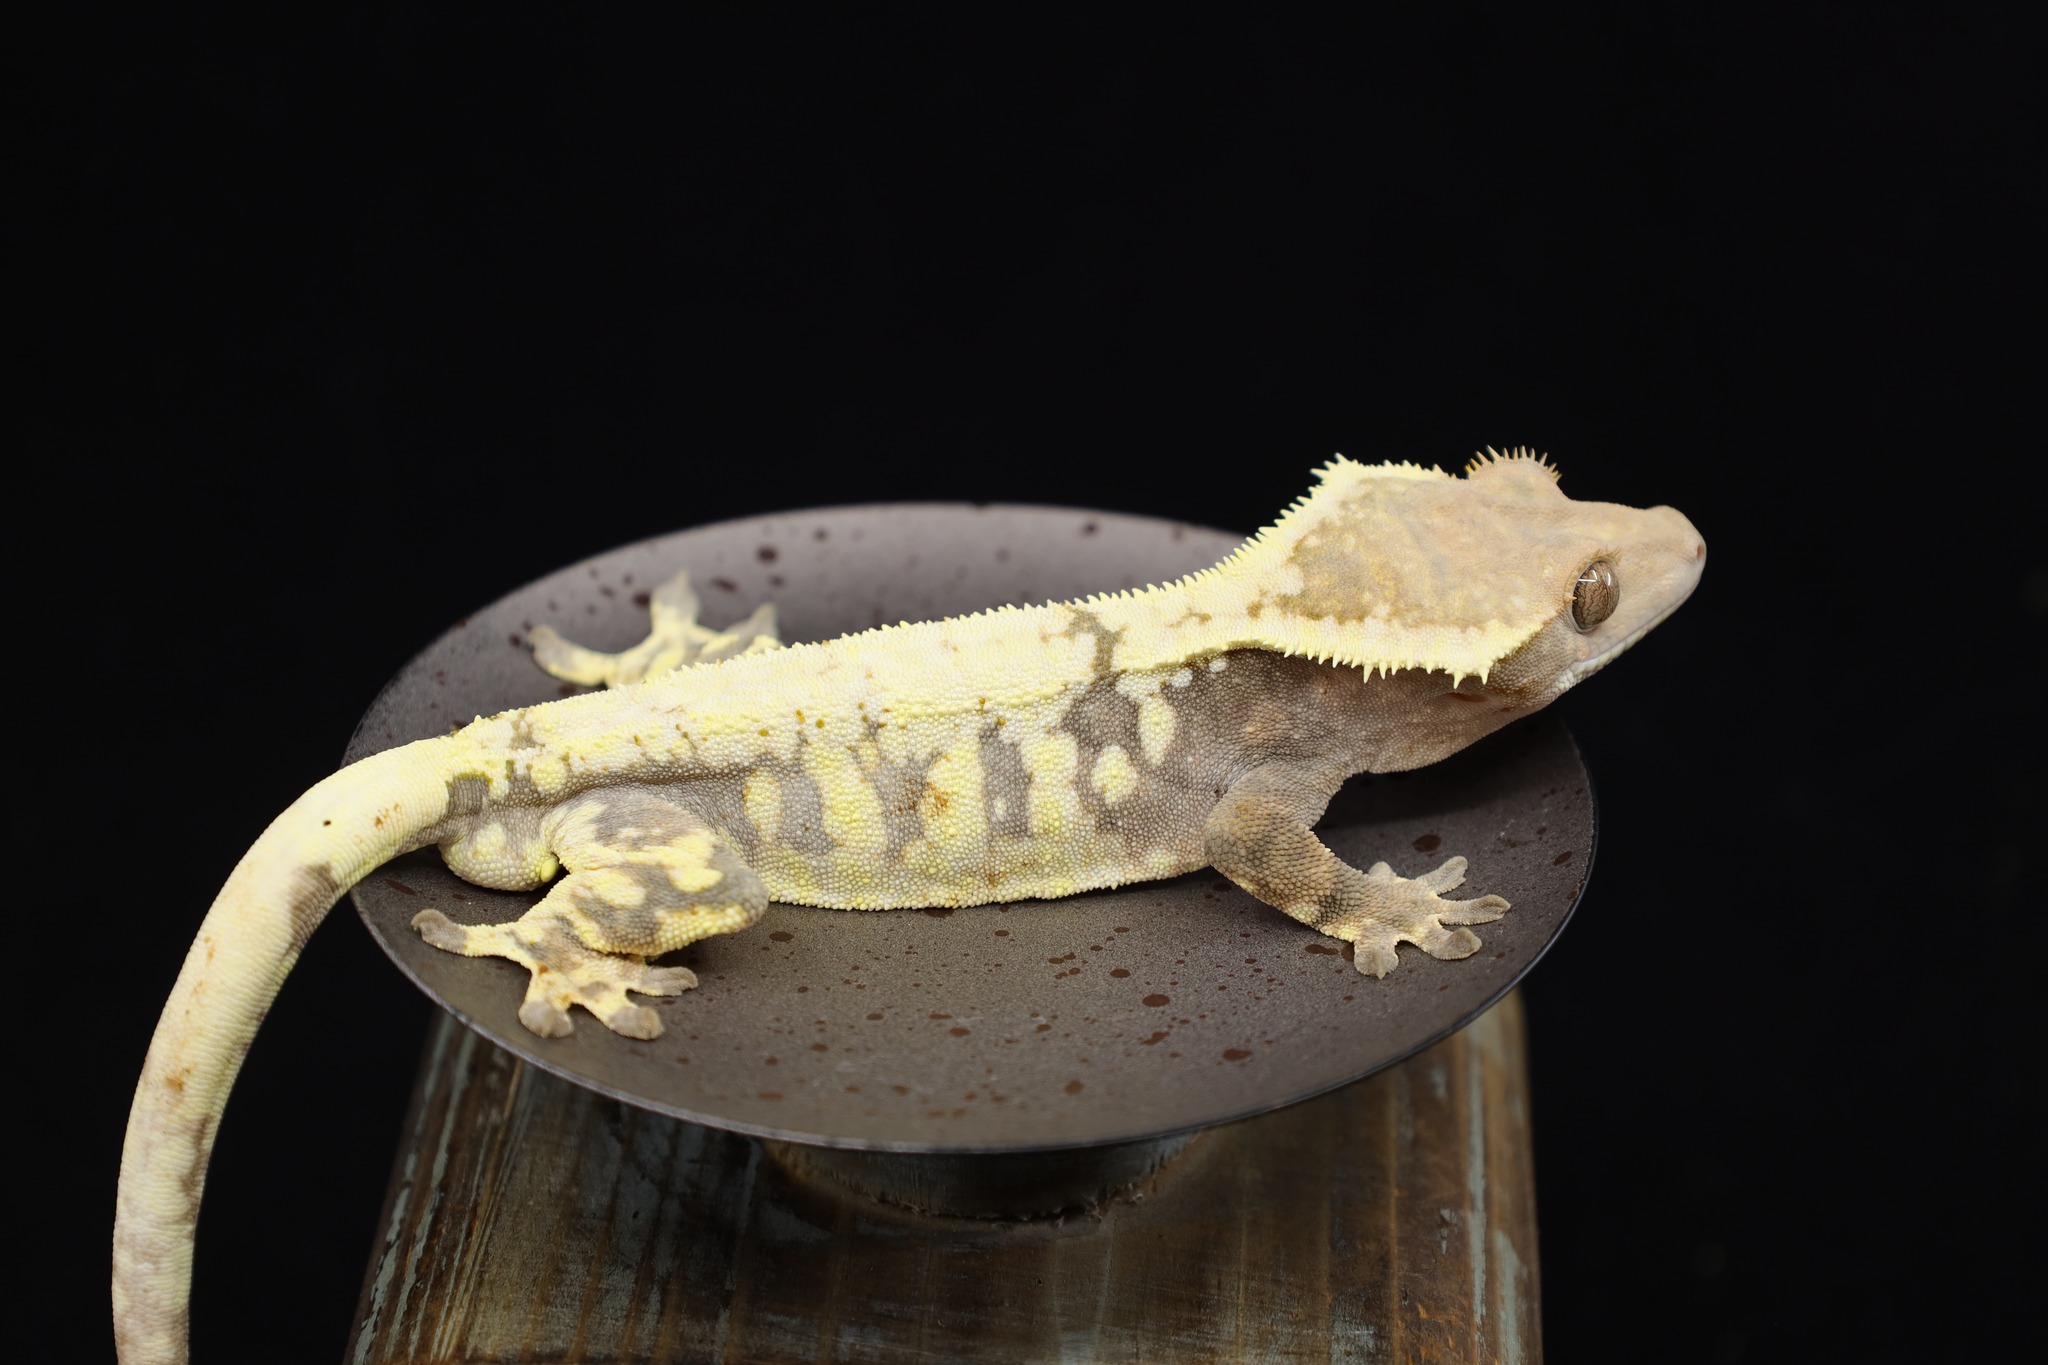 Sable by Lil Monster Reptiles